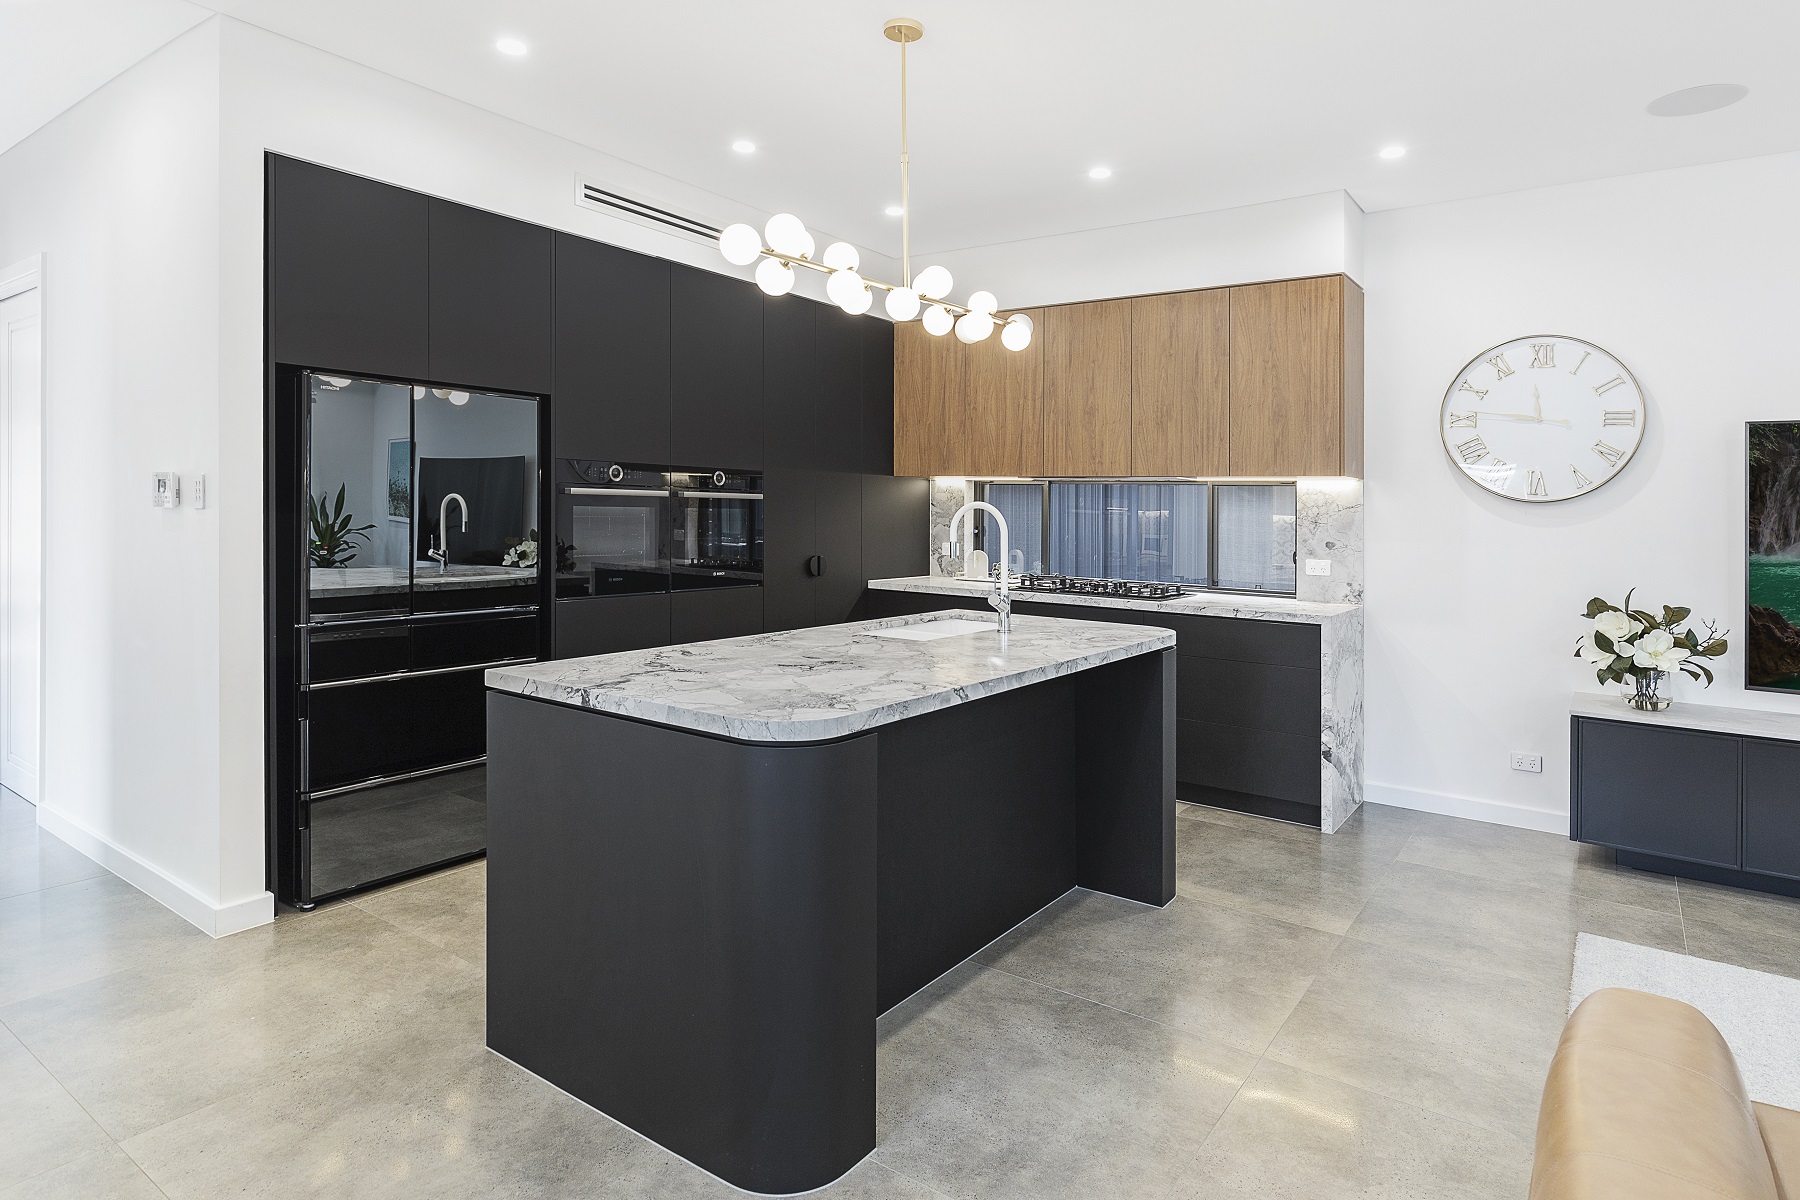 Chipping Norton, Matt black kitchen featuring Super White Stone benches and a curved edge island